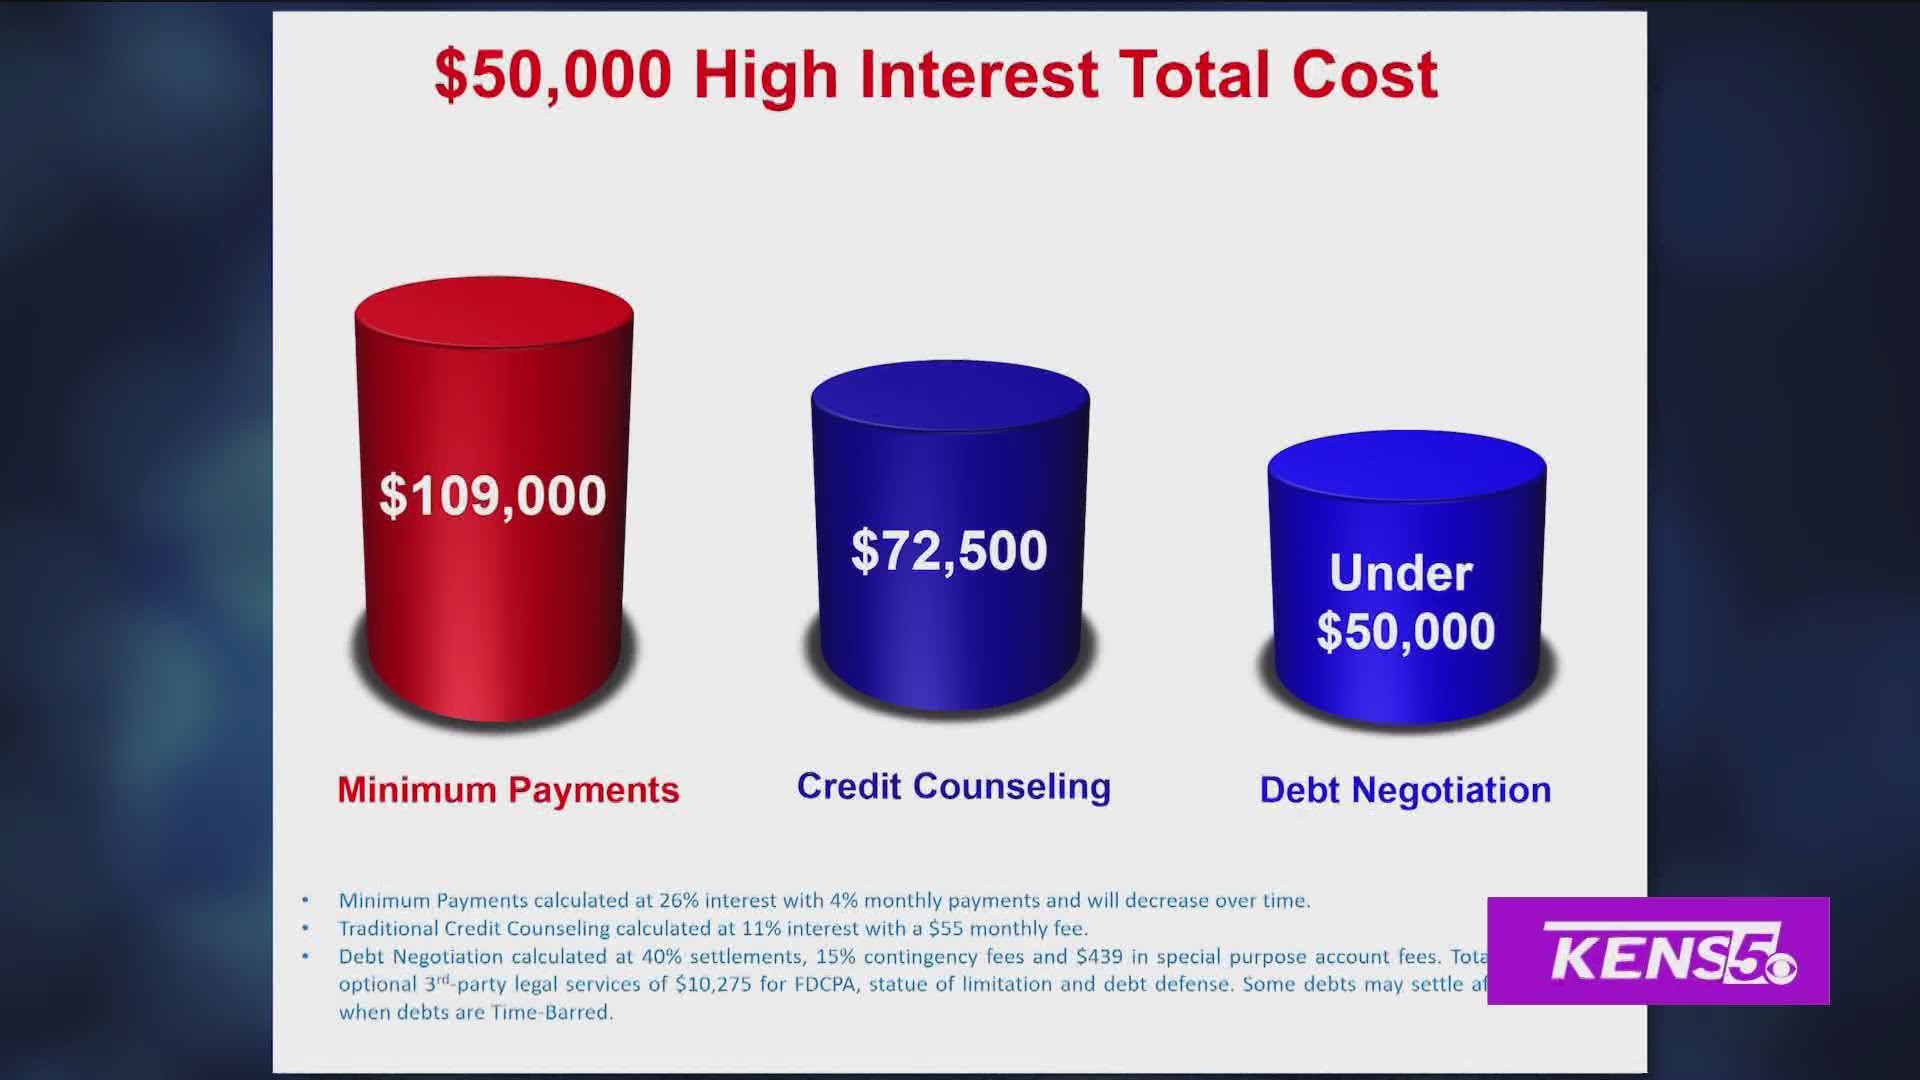 Affordable Debt Consolidation is helping people gain control of their credit card debt through credit counseling.